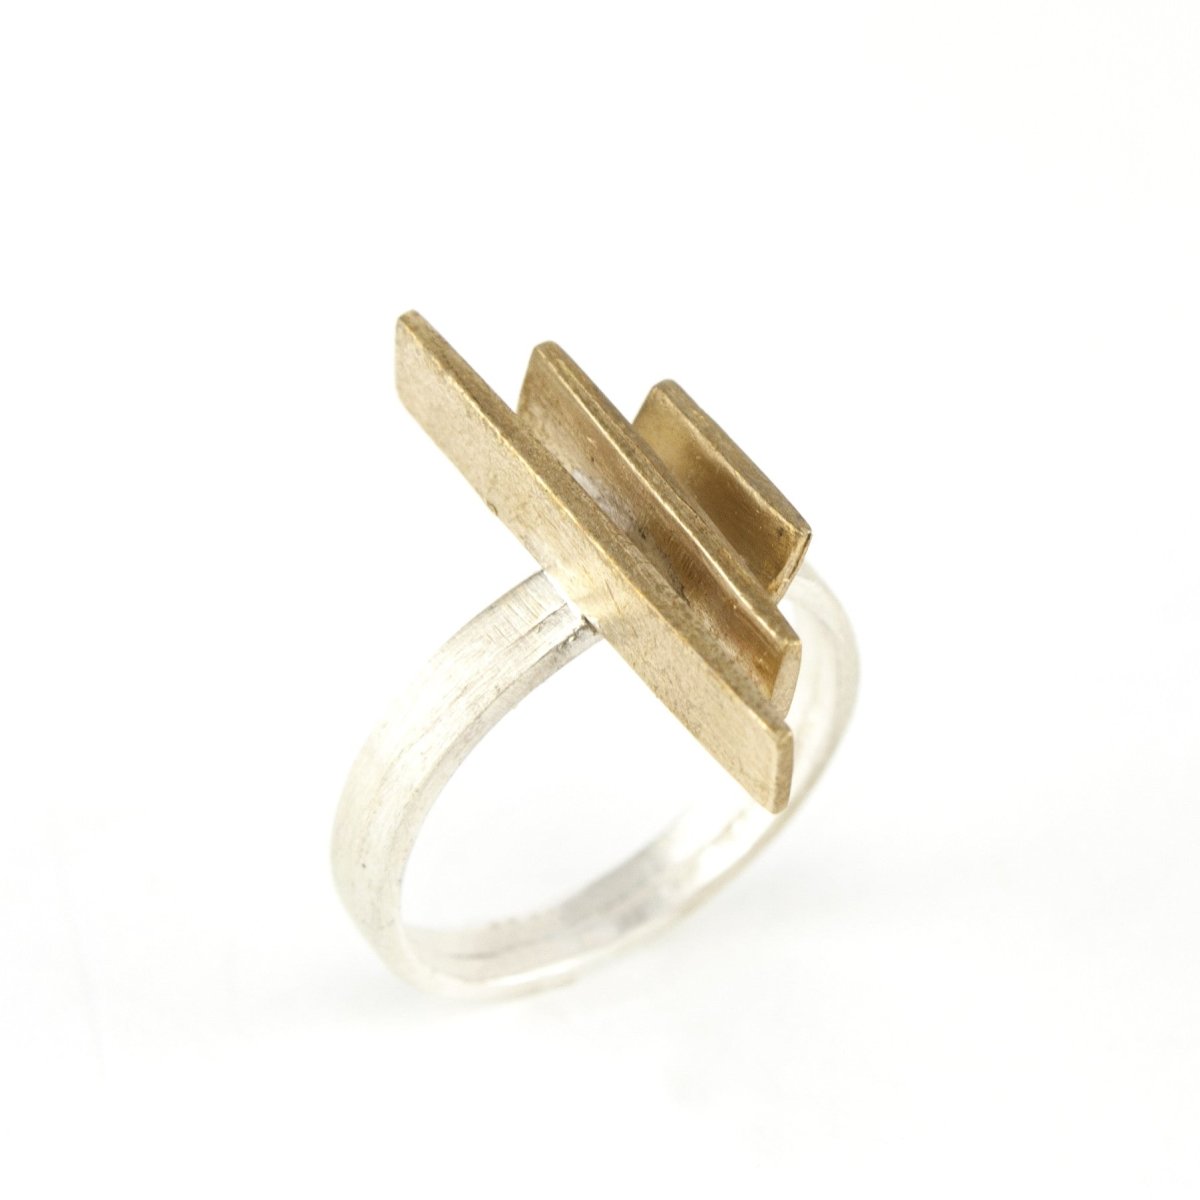 Silver ring with linear bronze bars.